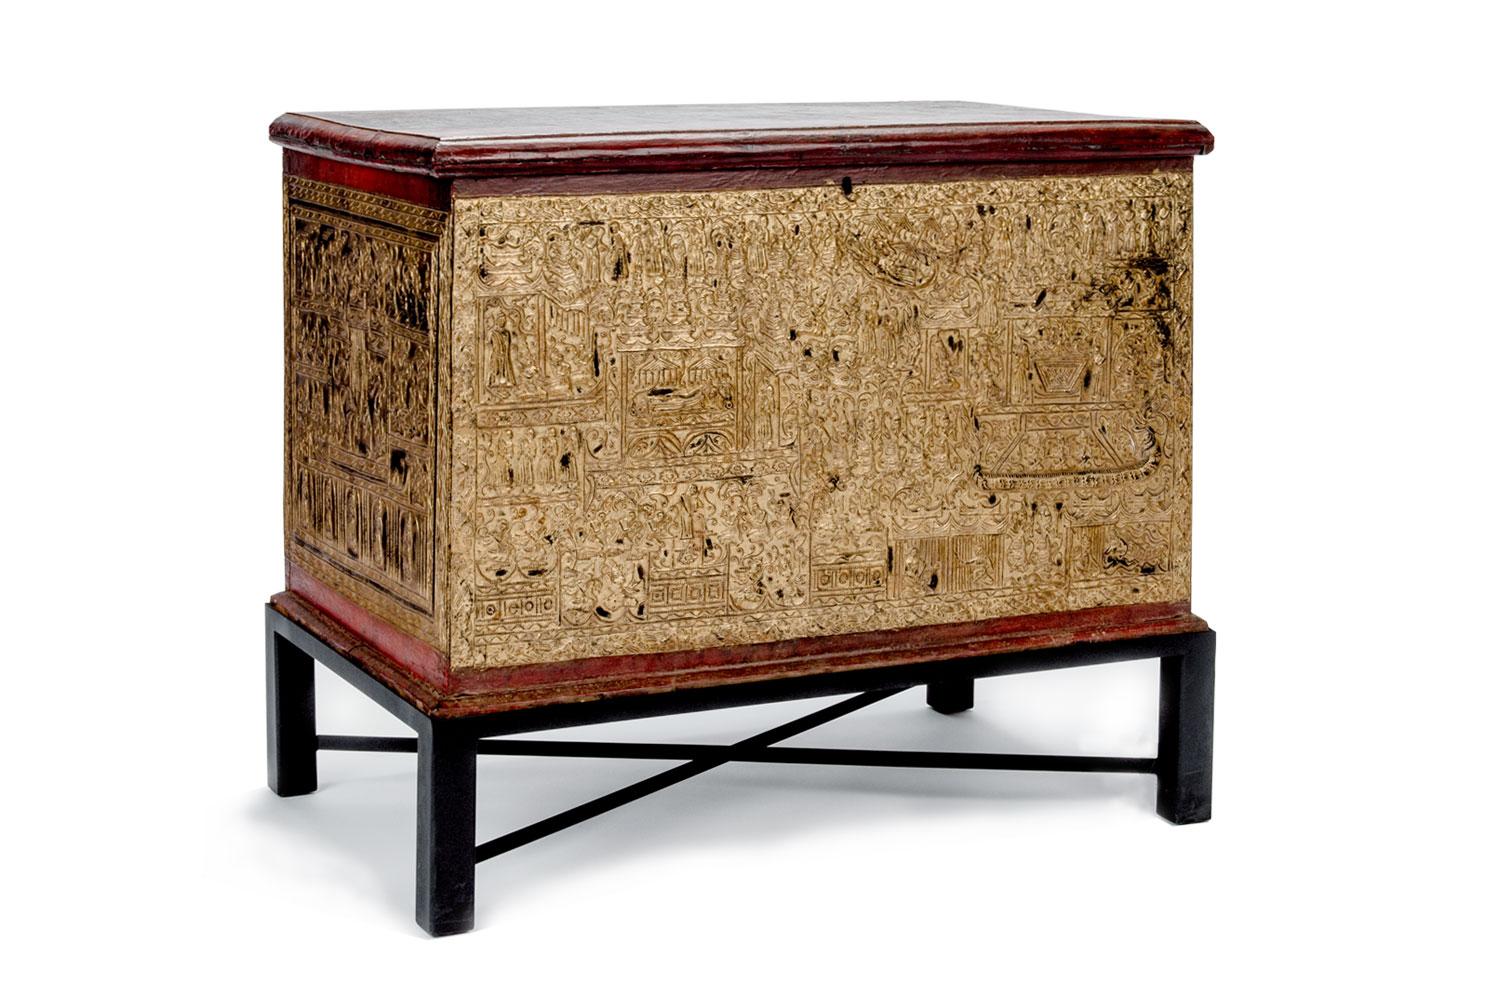 19th century teak Burmese manuscript chest. Made from teak and lacquered red with gold leaf accentuating depictions of the life of Buddha. Lid lifts open and sits on steel stand.

Measures: 38.5